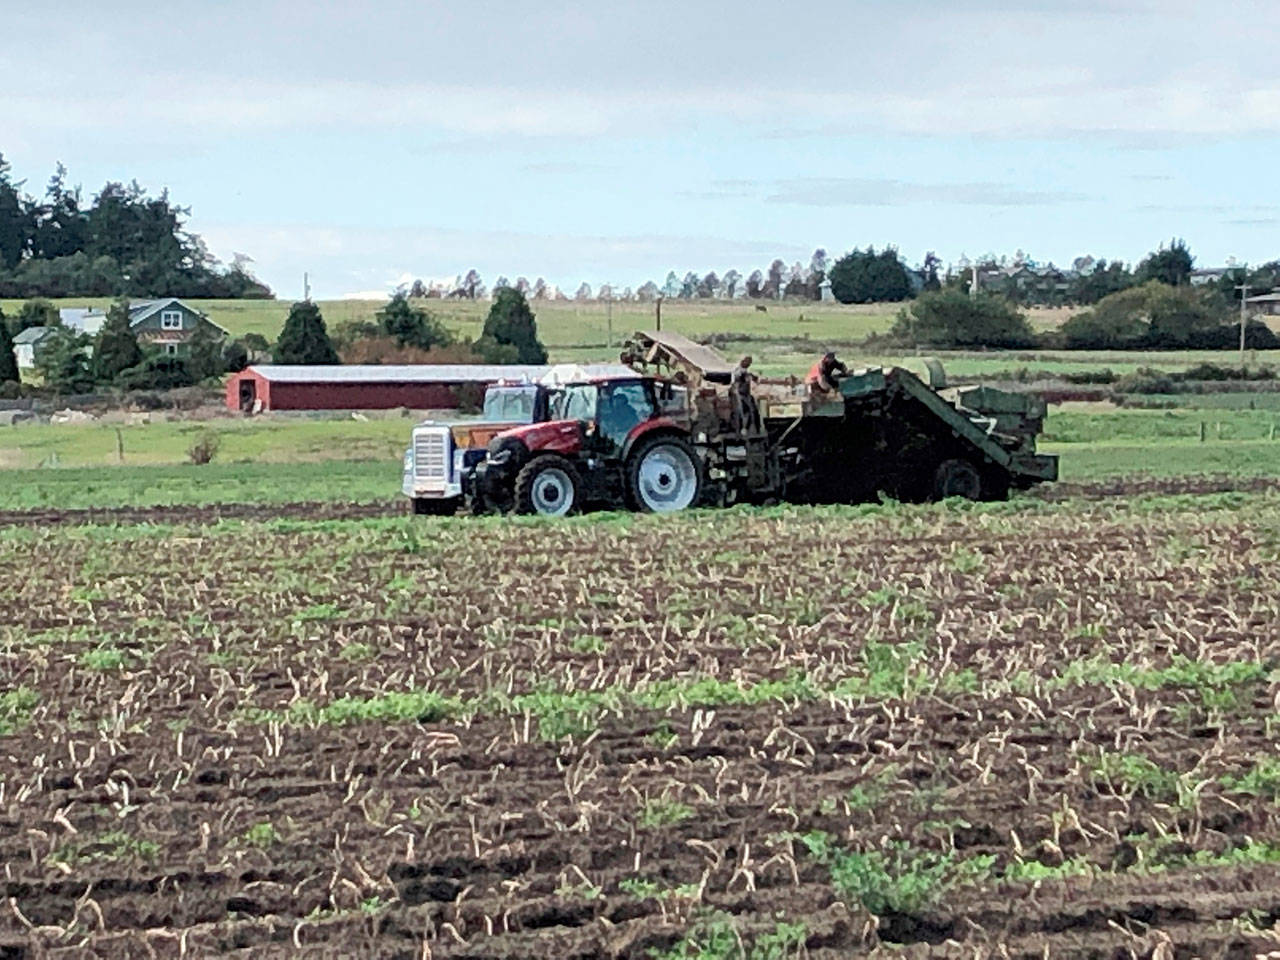 Photo provided by Steve Hilborn                                Island Potato grows potatoes in Central Whidbey.